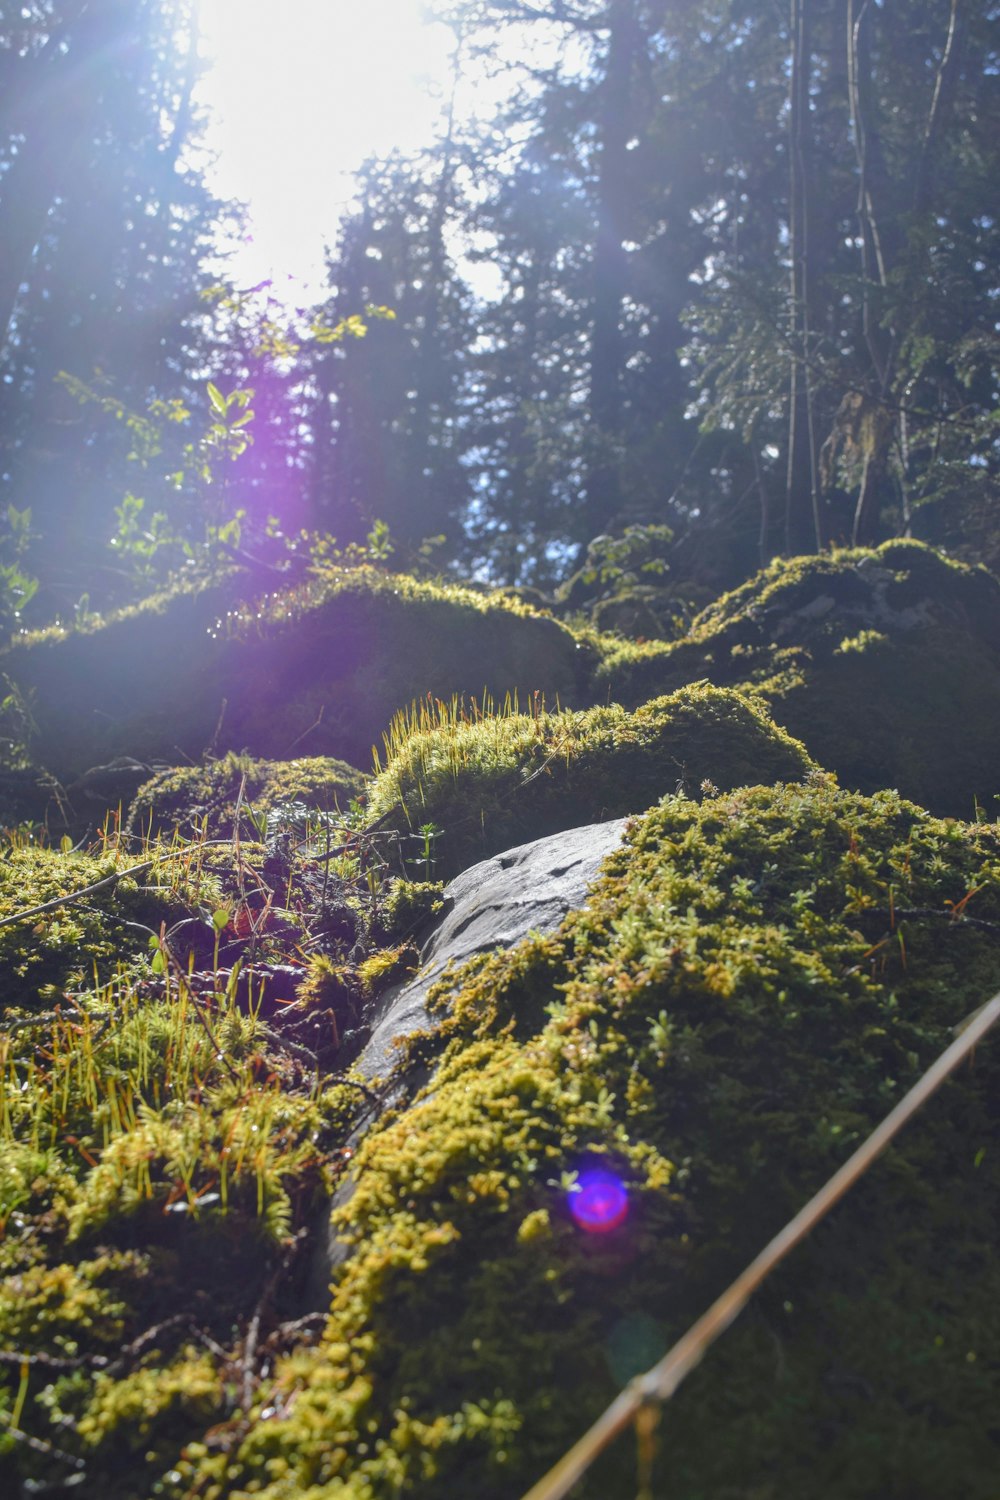 the sun shines on the mossy rocks in the woods